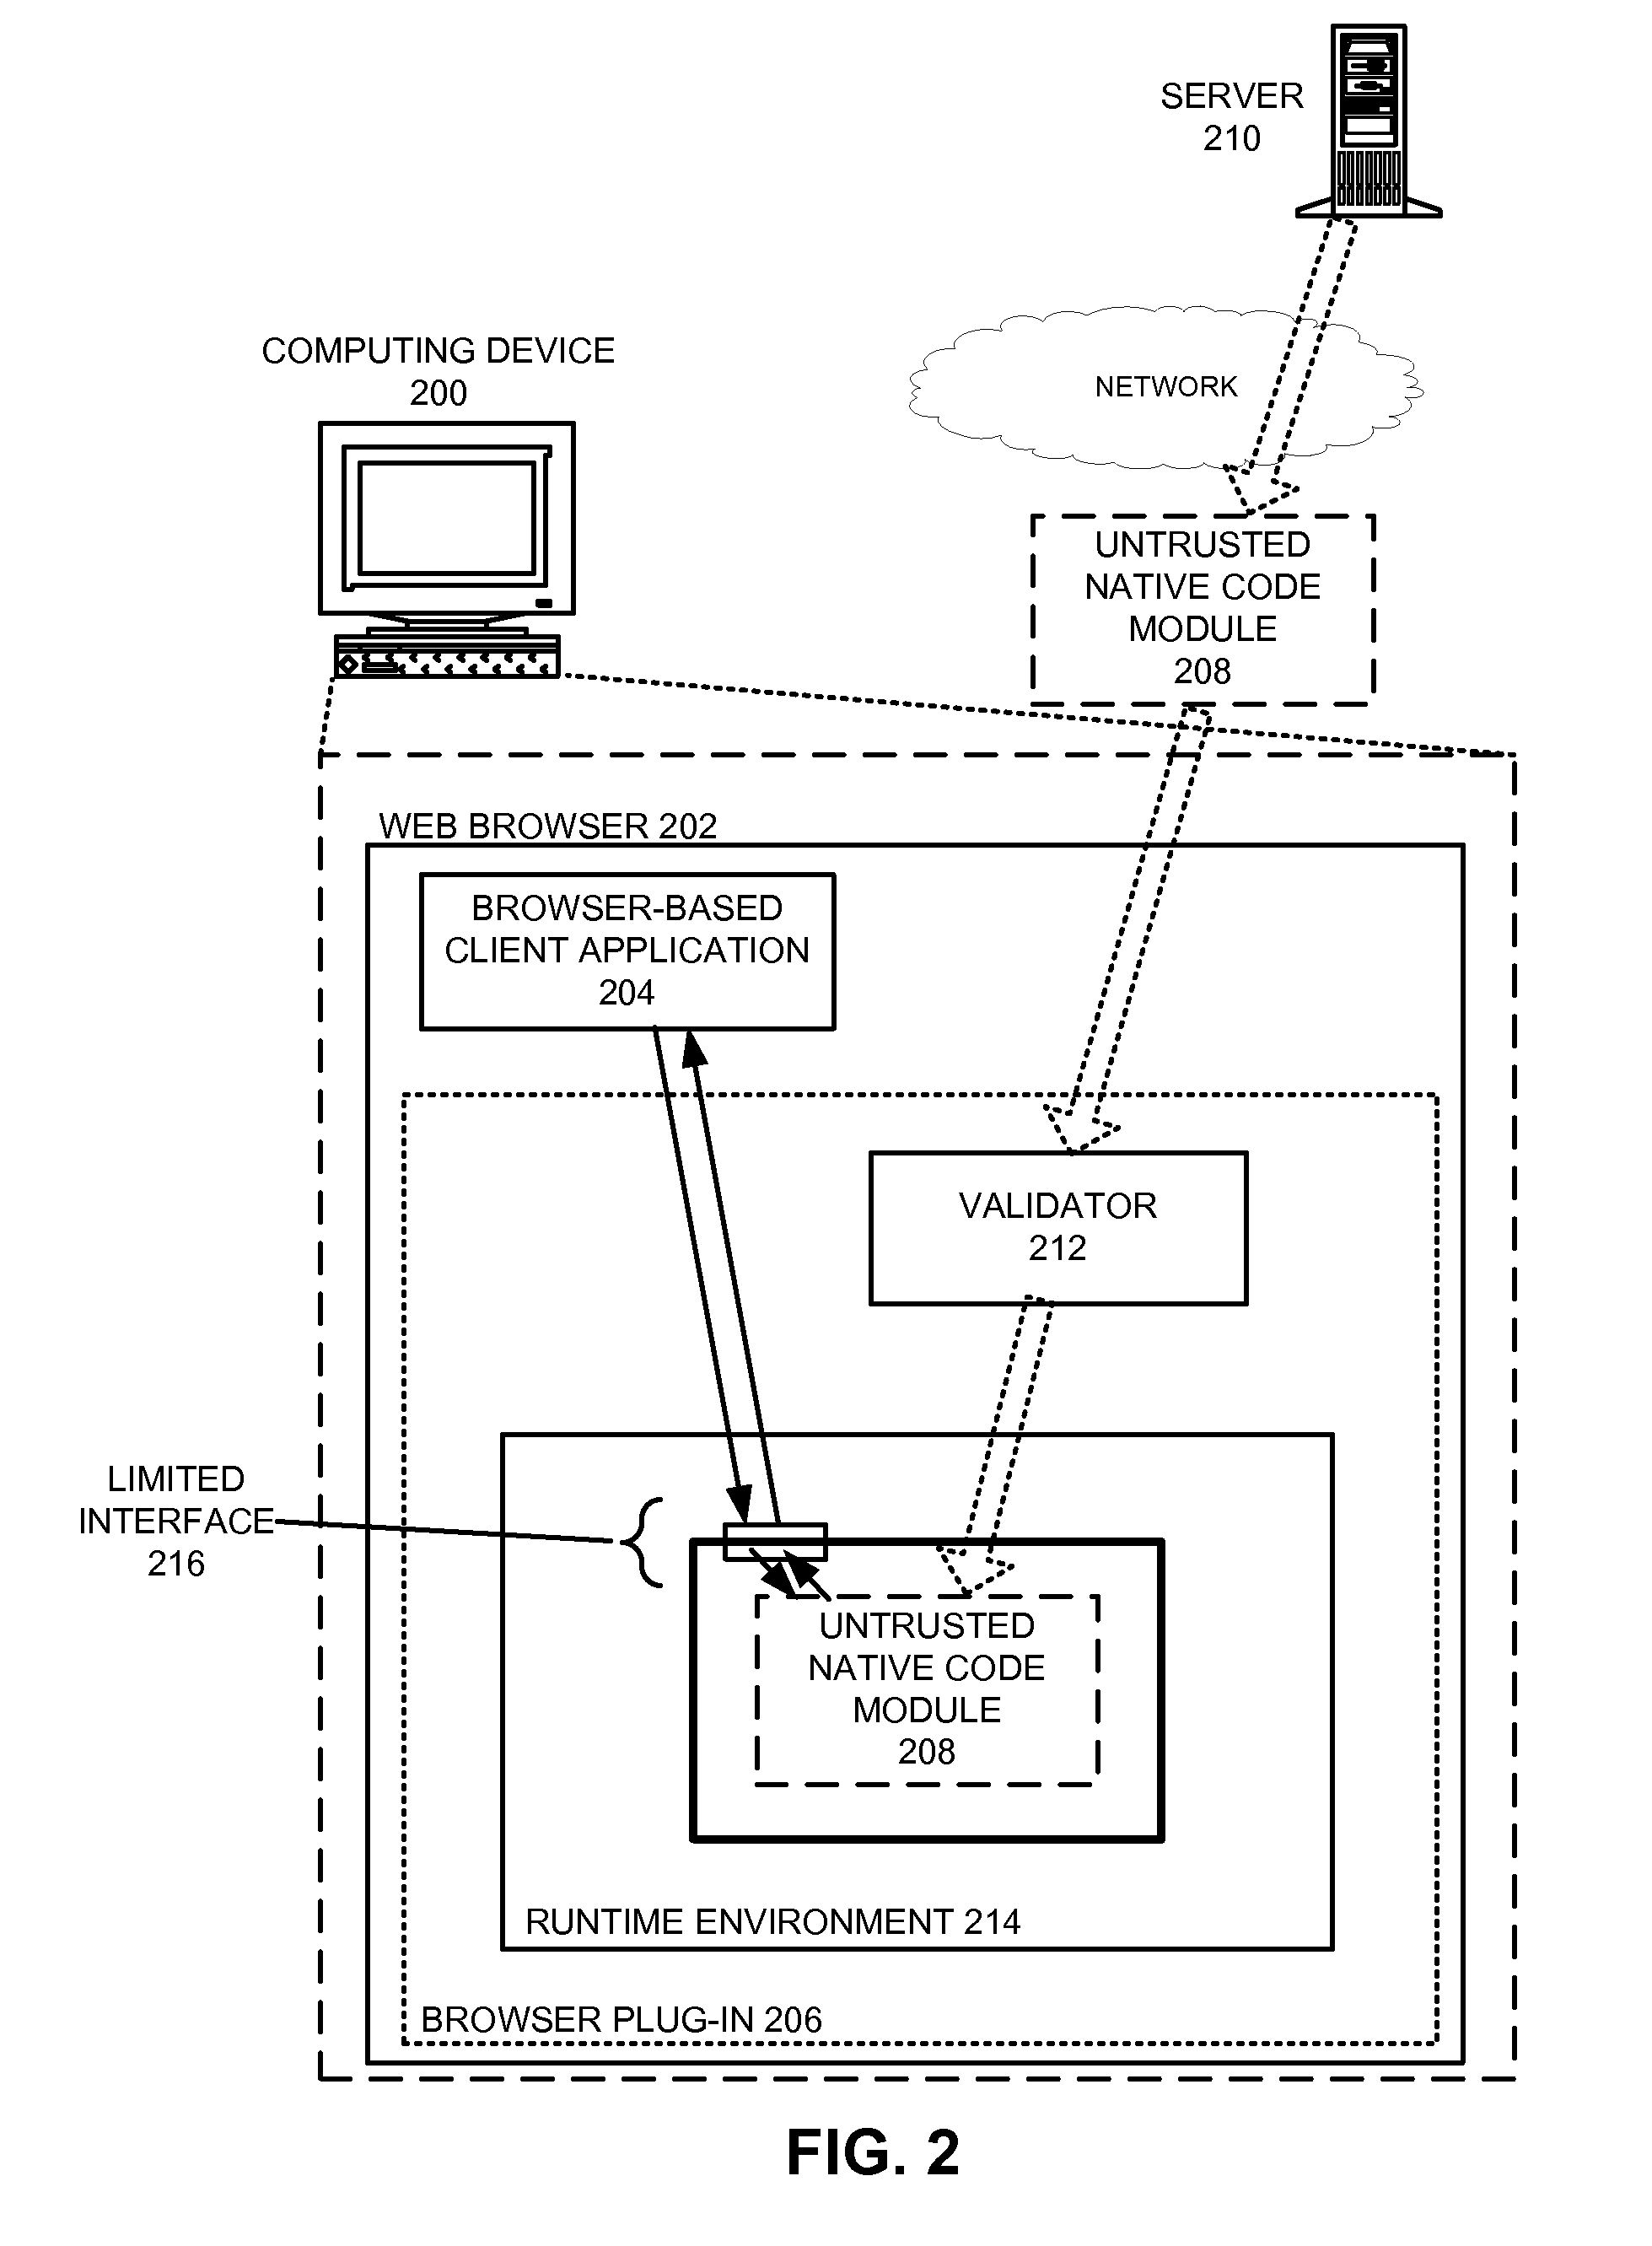 Method for validating an untrusted native code module